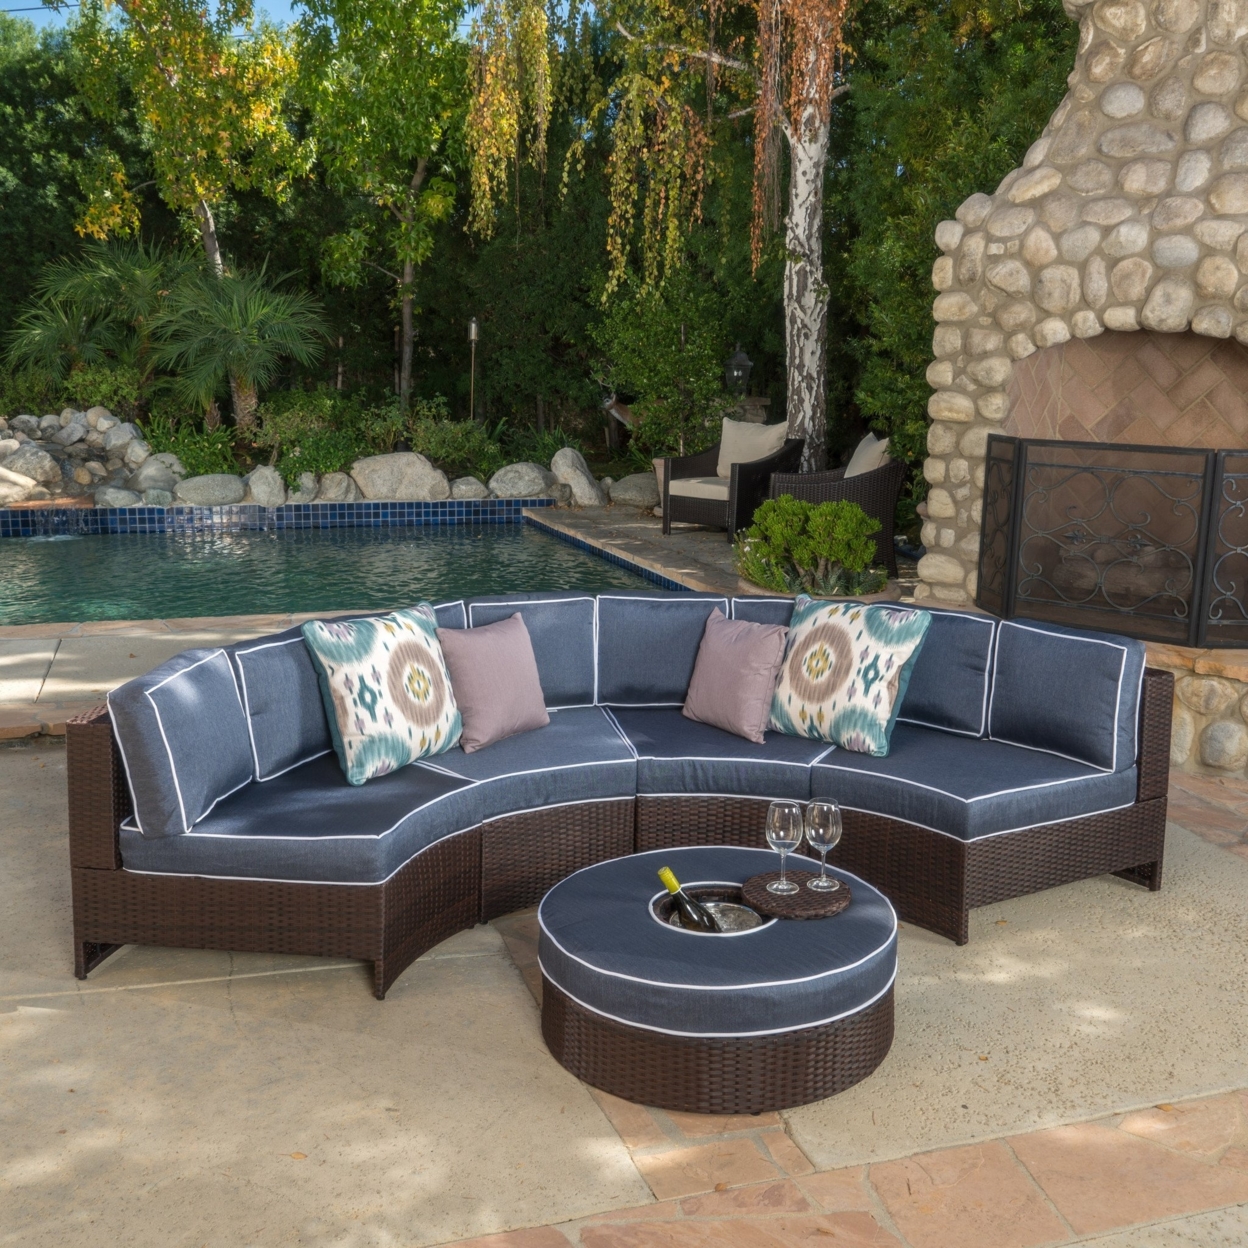 Riviera 5pc Outdoor Sectional Sofa Set With Ice Bucket Ottoman - Beige